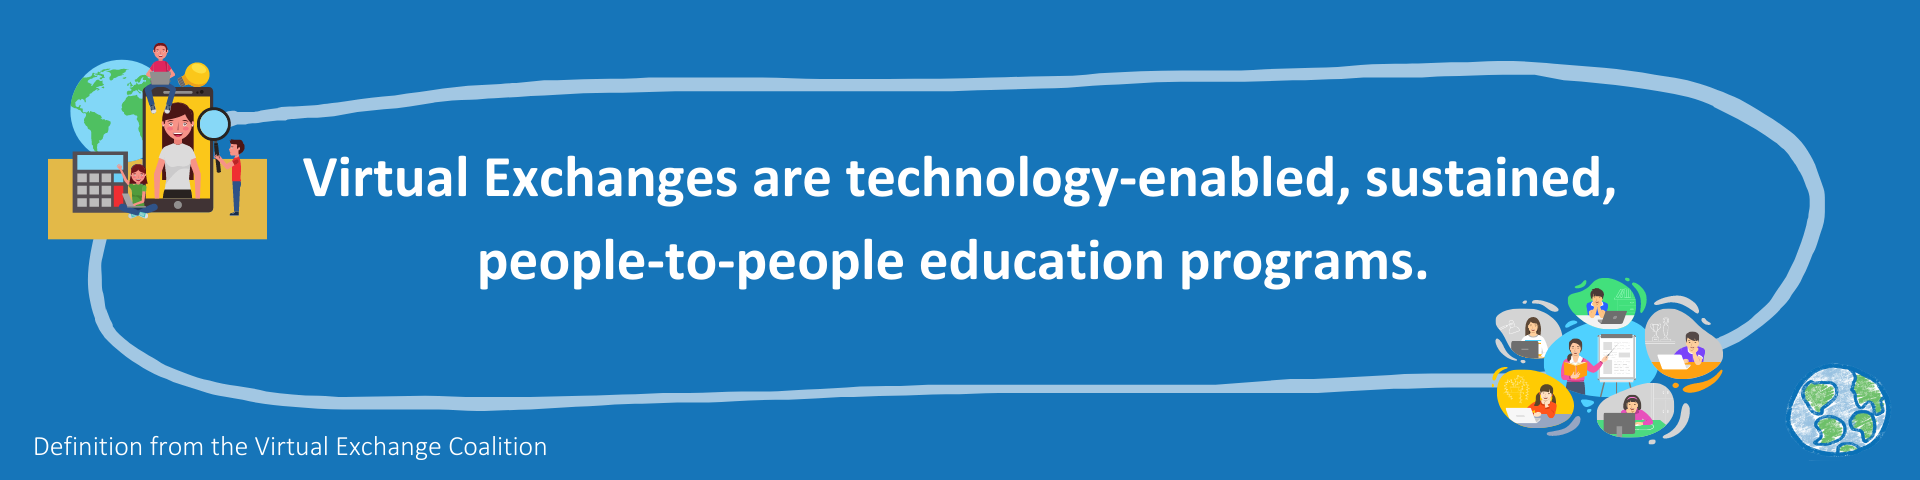 Virtual exchanges are technology-enabled people-to-people education programs